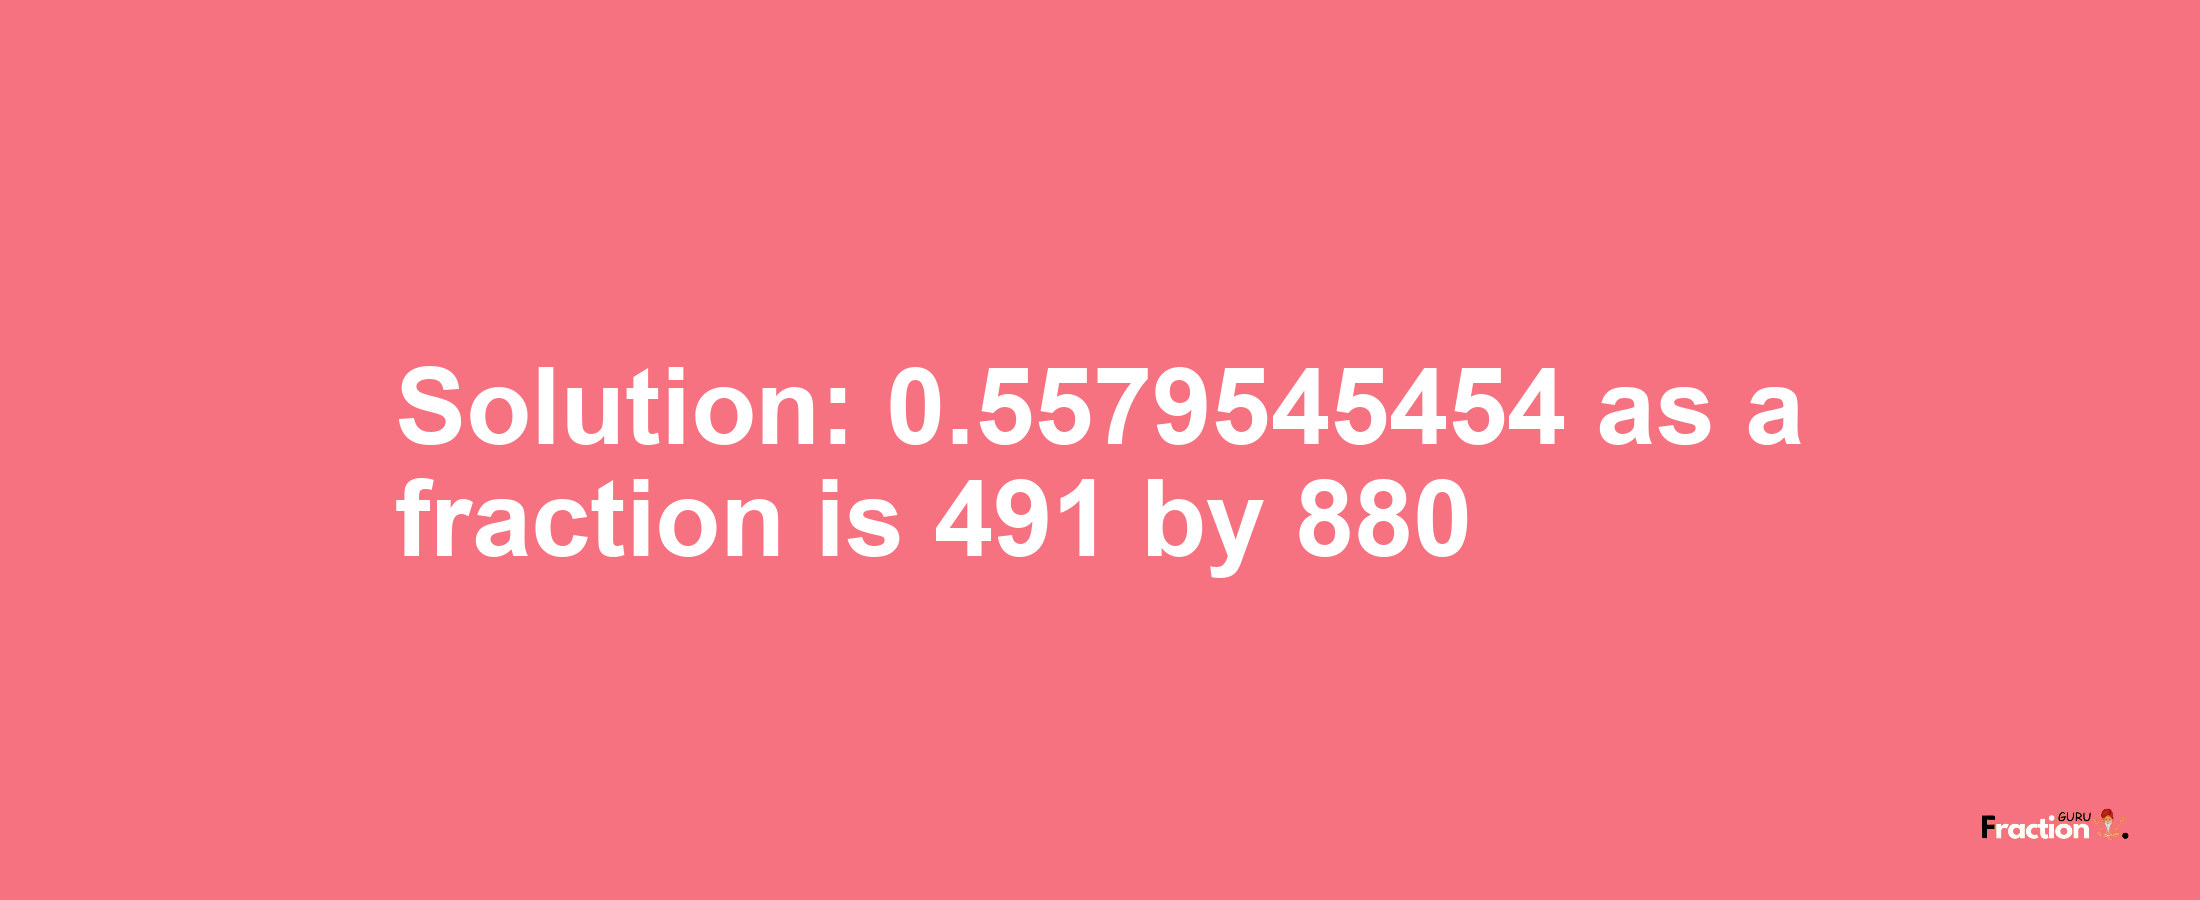 Solution:0.5579545454 as a fraction is 491/880